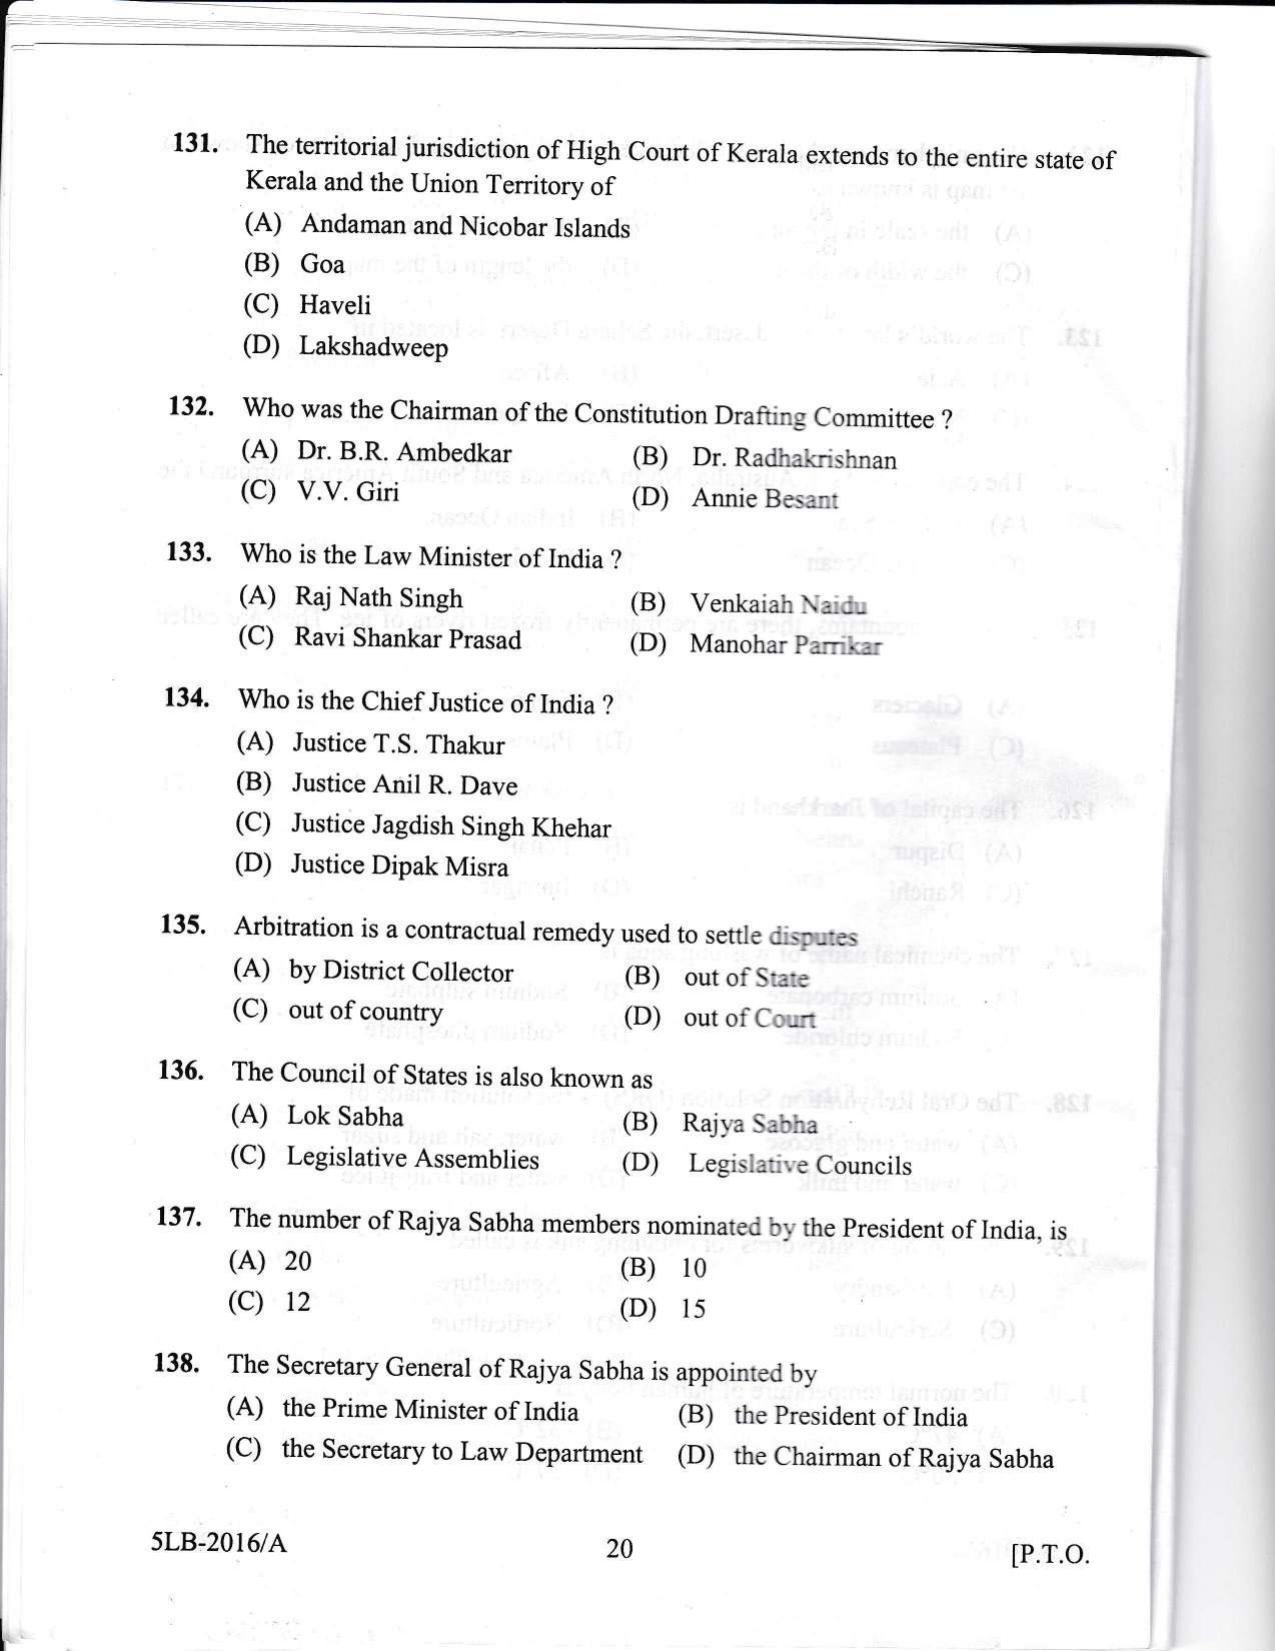 KLEE 5 Year LLB Exam 2016 Question Paper - Page 20